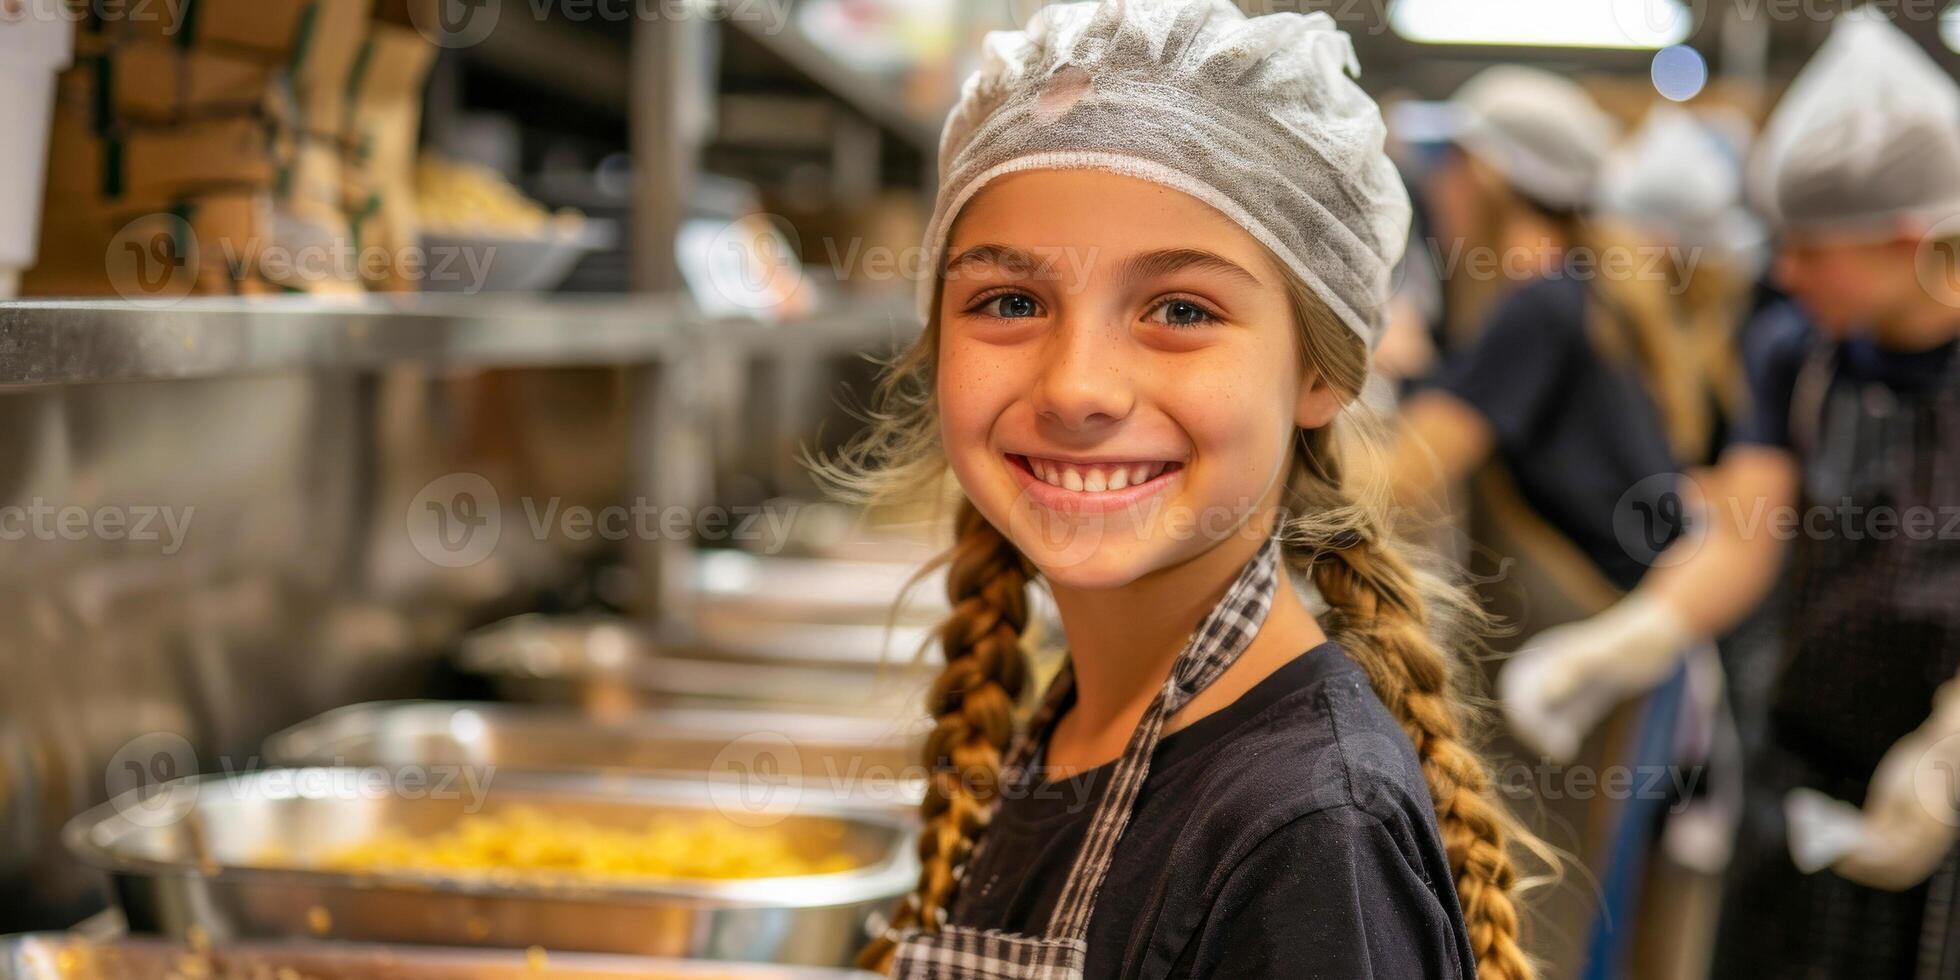 AI generated Smiling young girl wearing an apron and gloves helping in a food preparation line with other volunteers in the background photo